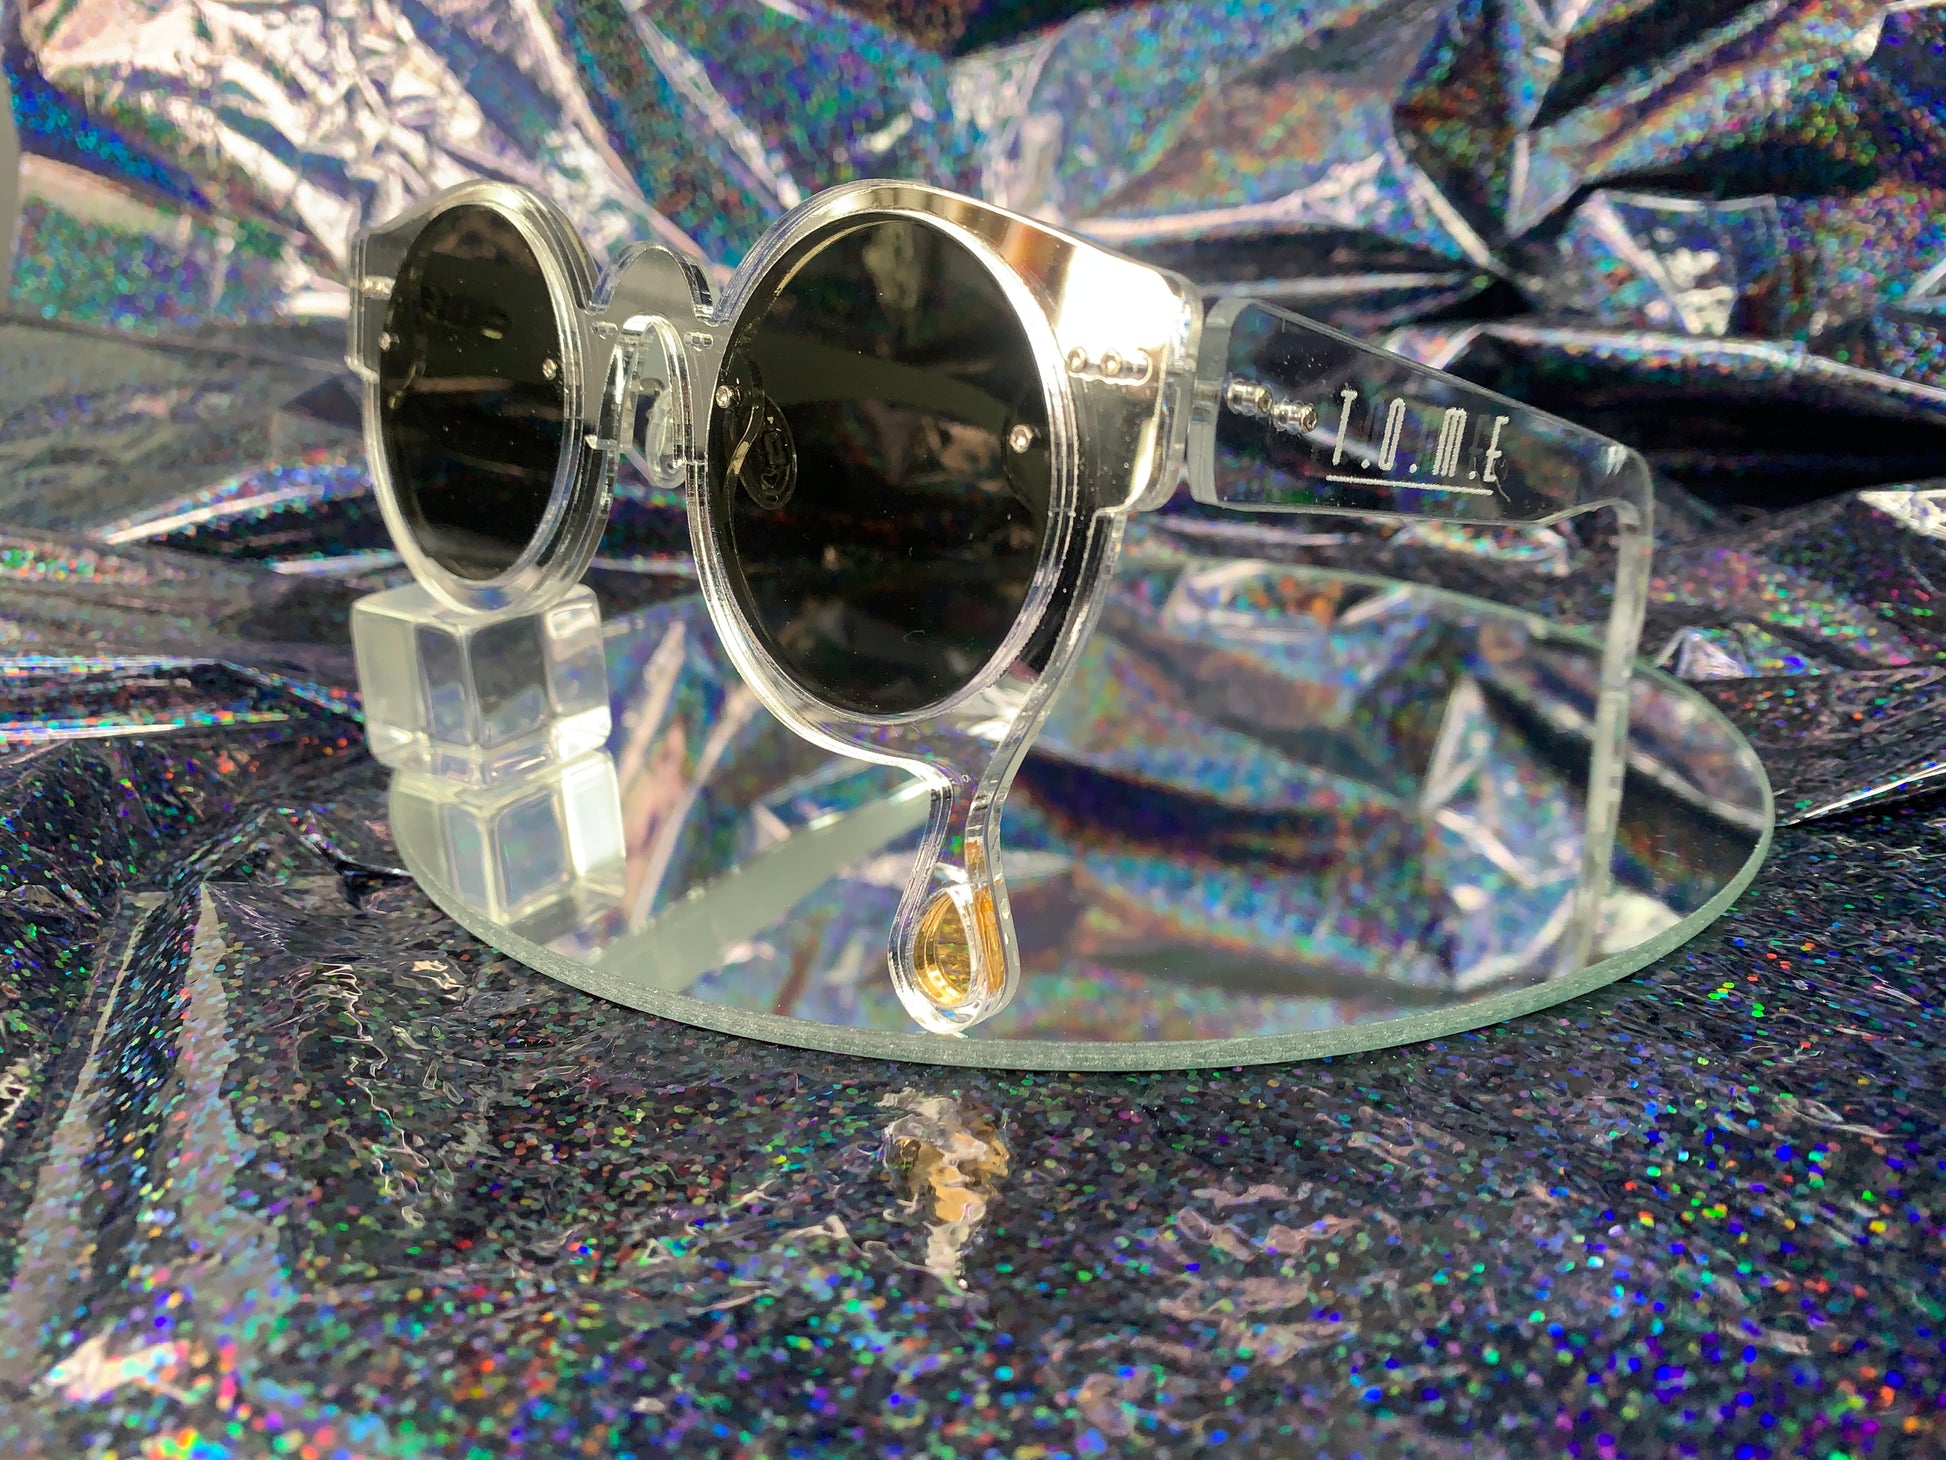 A side view of acrylic laser cut sunglasses with a teardrop accent dripping down the right side of the glasses with the brand logo T.O.M.E. etched on the temple. The color of the sunglasses shown are silver mirror.